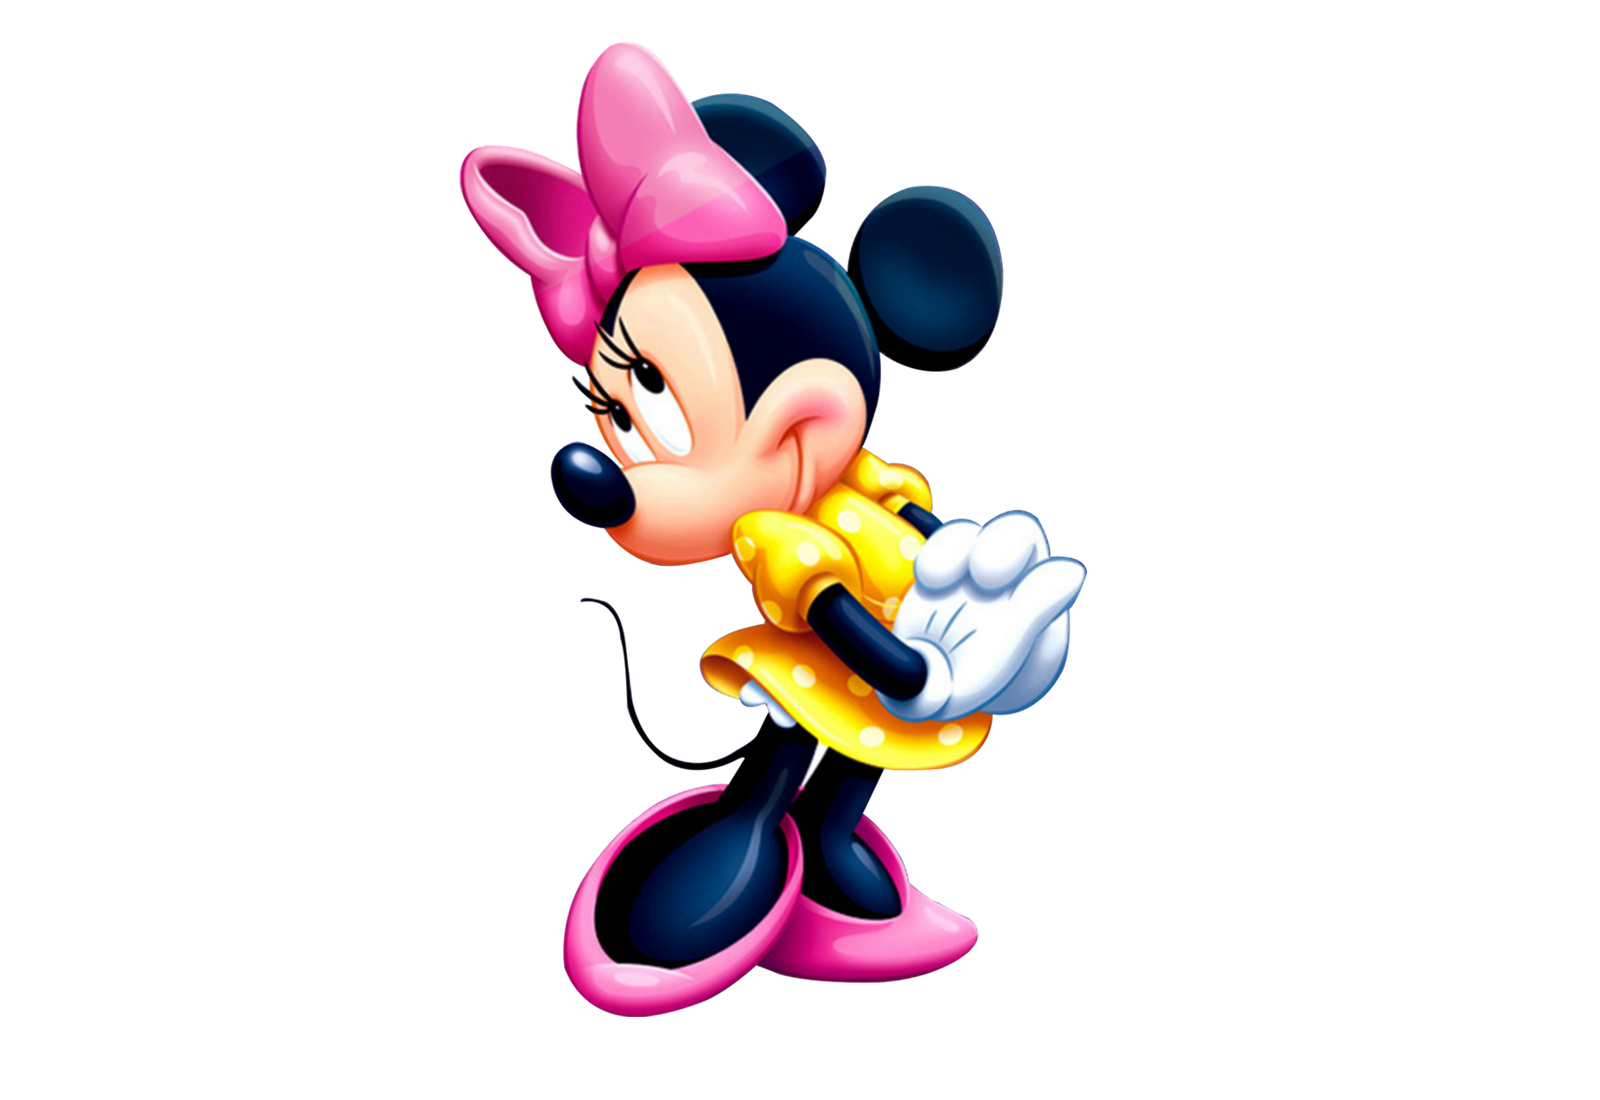 minnie mouse png clipart